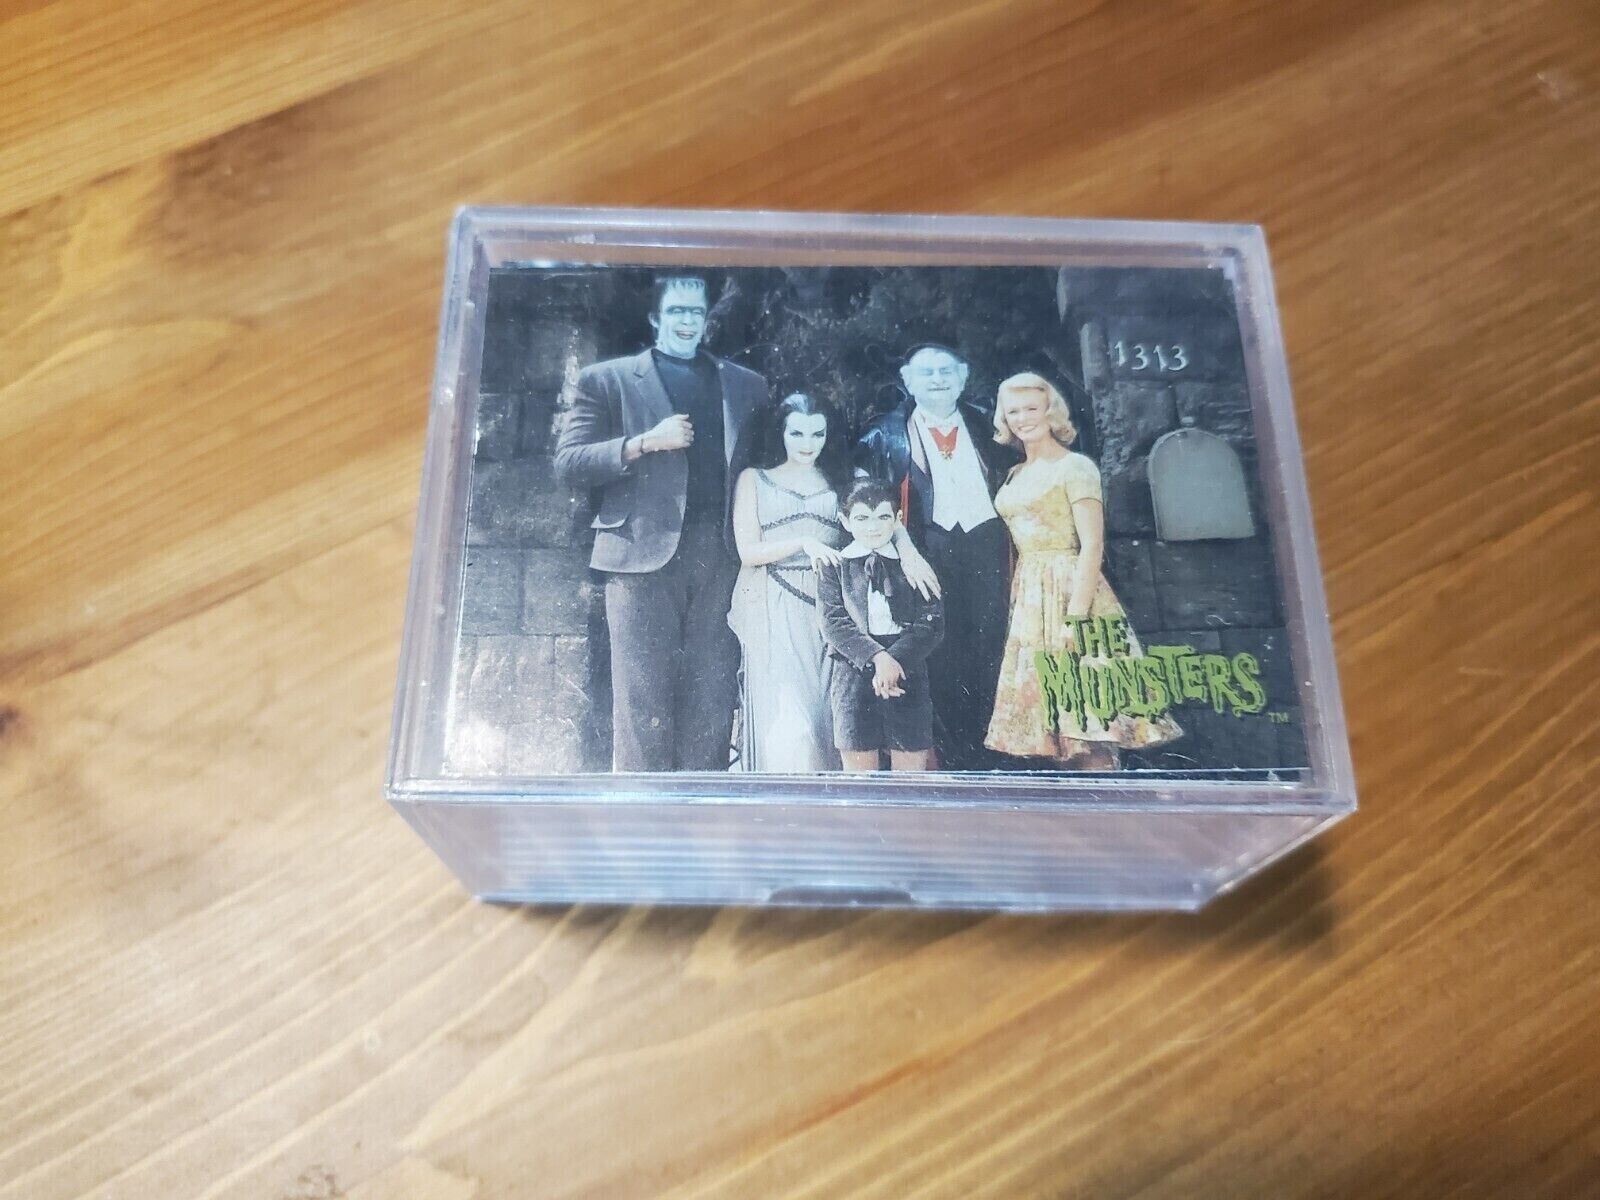 1996 Dart The Munsters Deluxe Collectors Trading Cards Complete Set 1-90 - PAGES